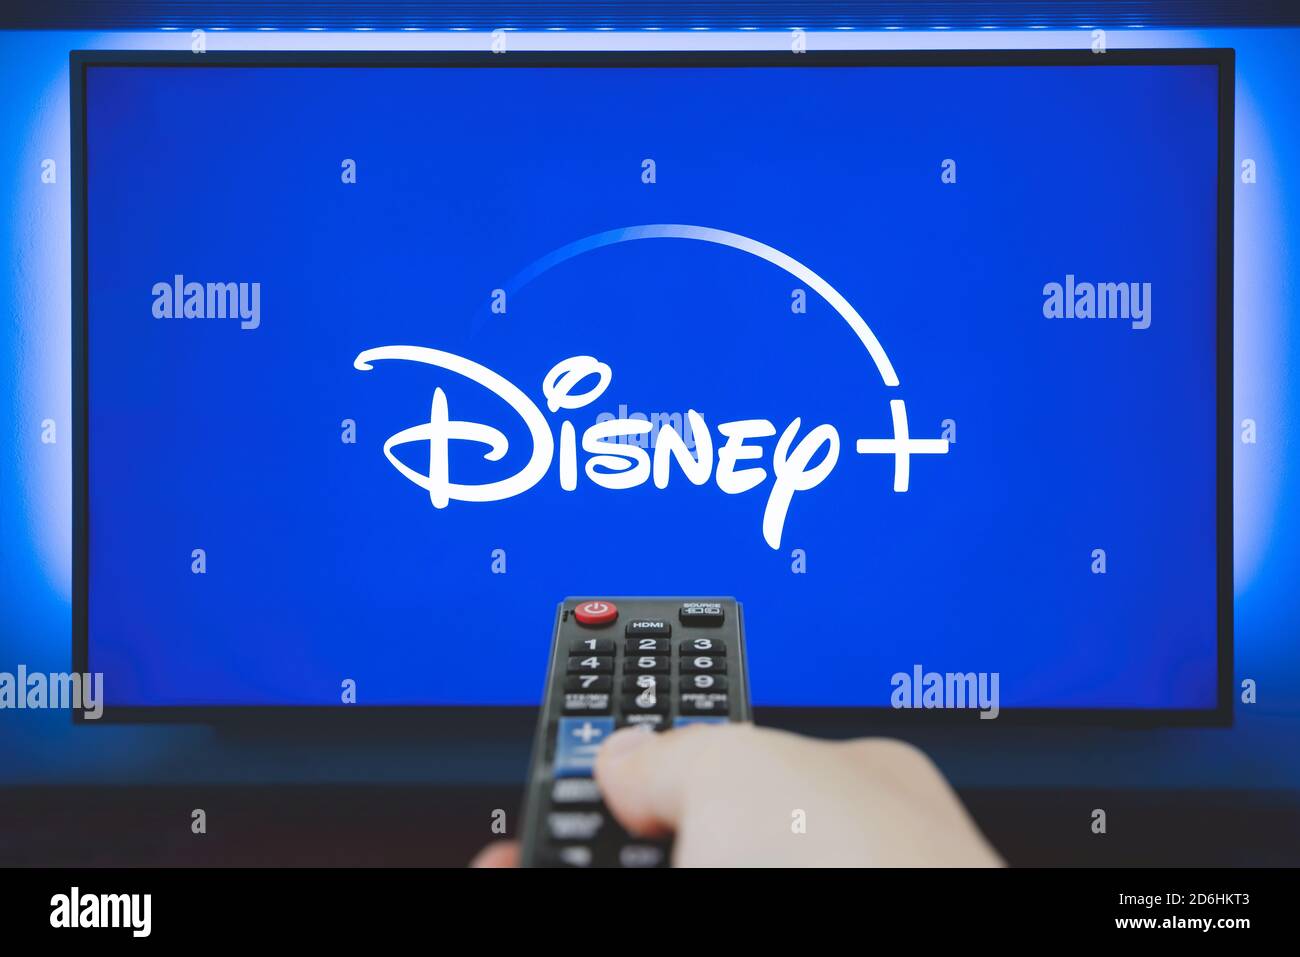 Wroclaw, Poland - OCT 13, 2020: Man holds a remote control. Disney+ logo on TV screen in background. Disney+ is a new online video streaming service Stock Photo